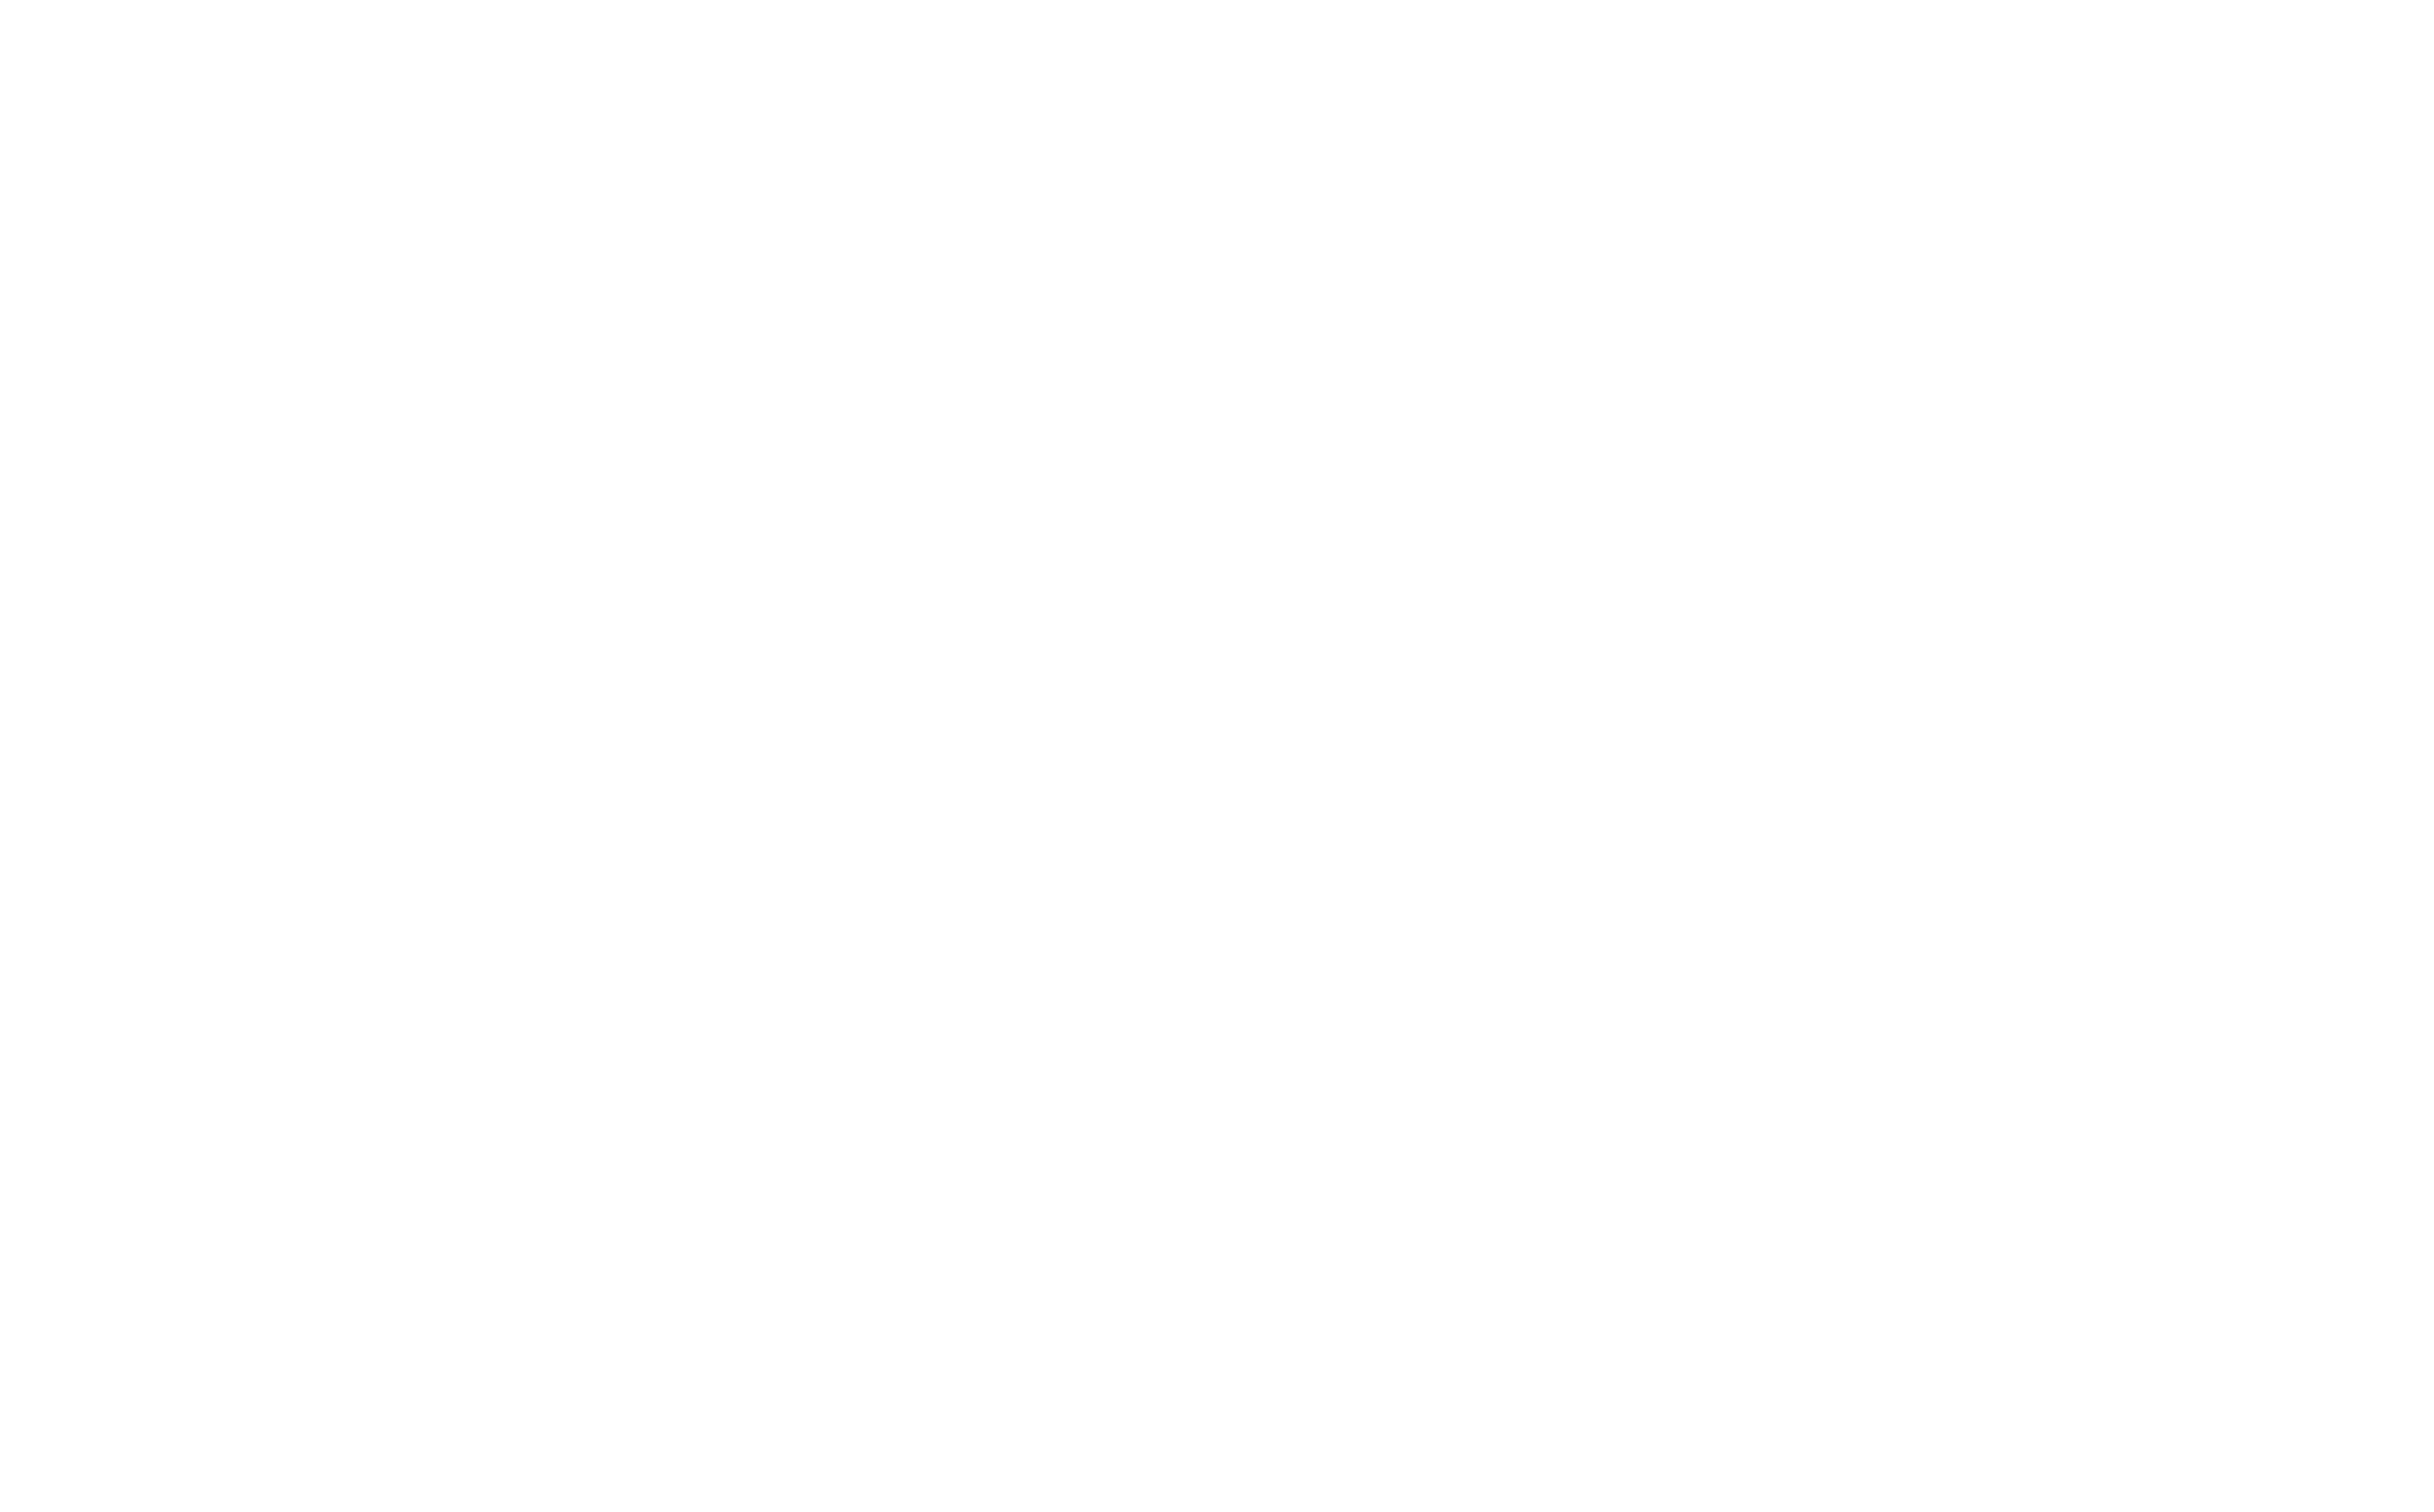 IBS GLOBAL – Innovation and Technology Consultant Services – Innovation Strategy Experts